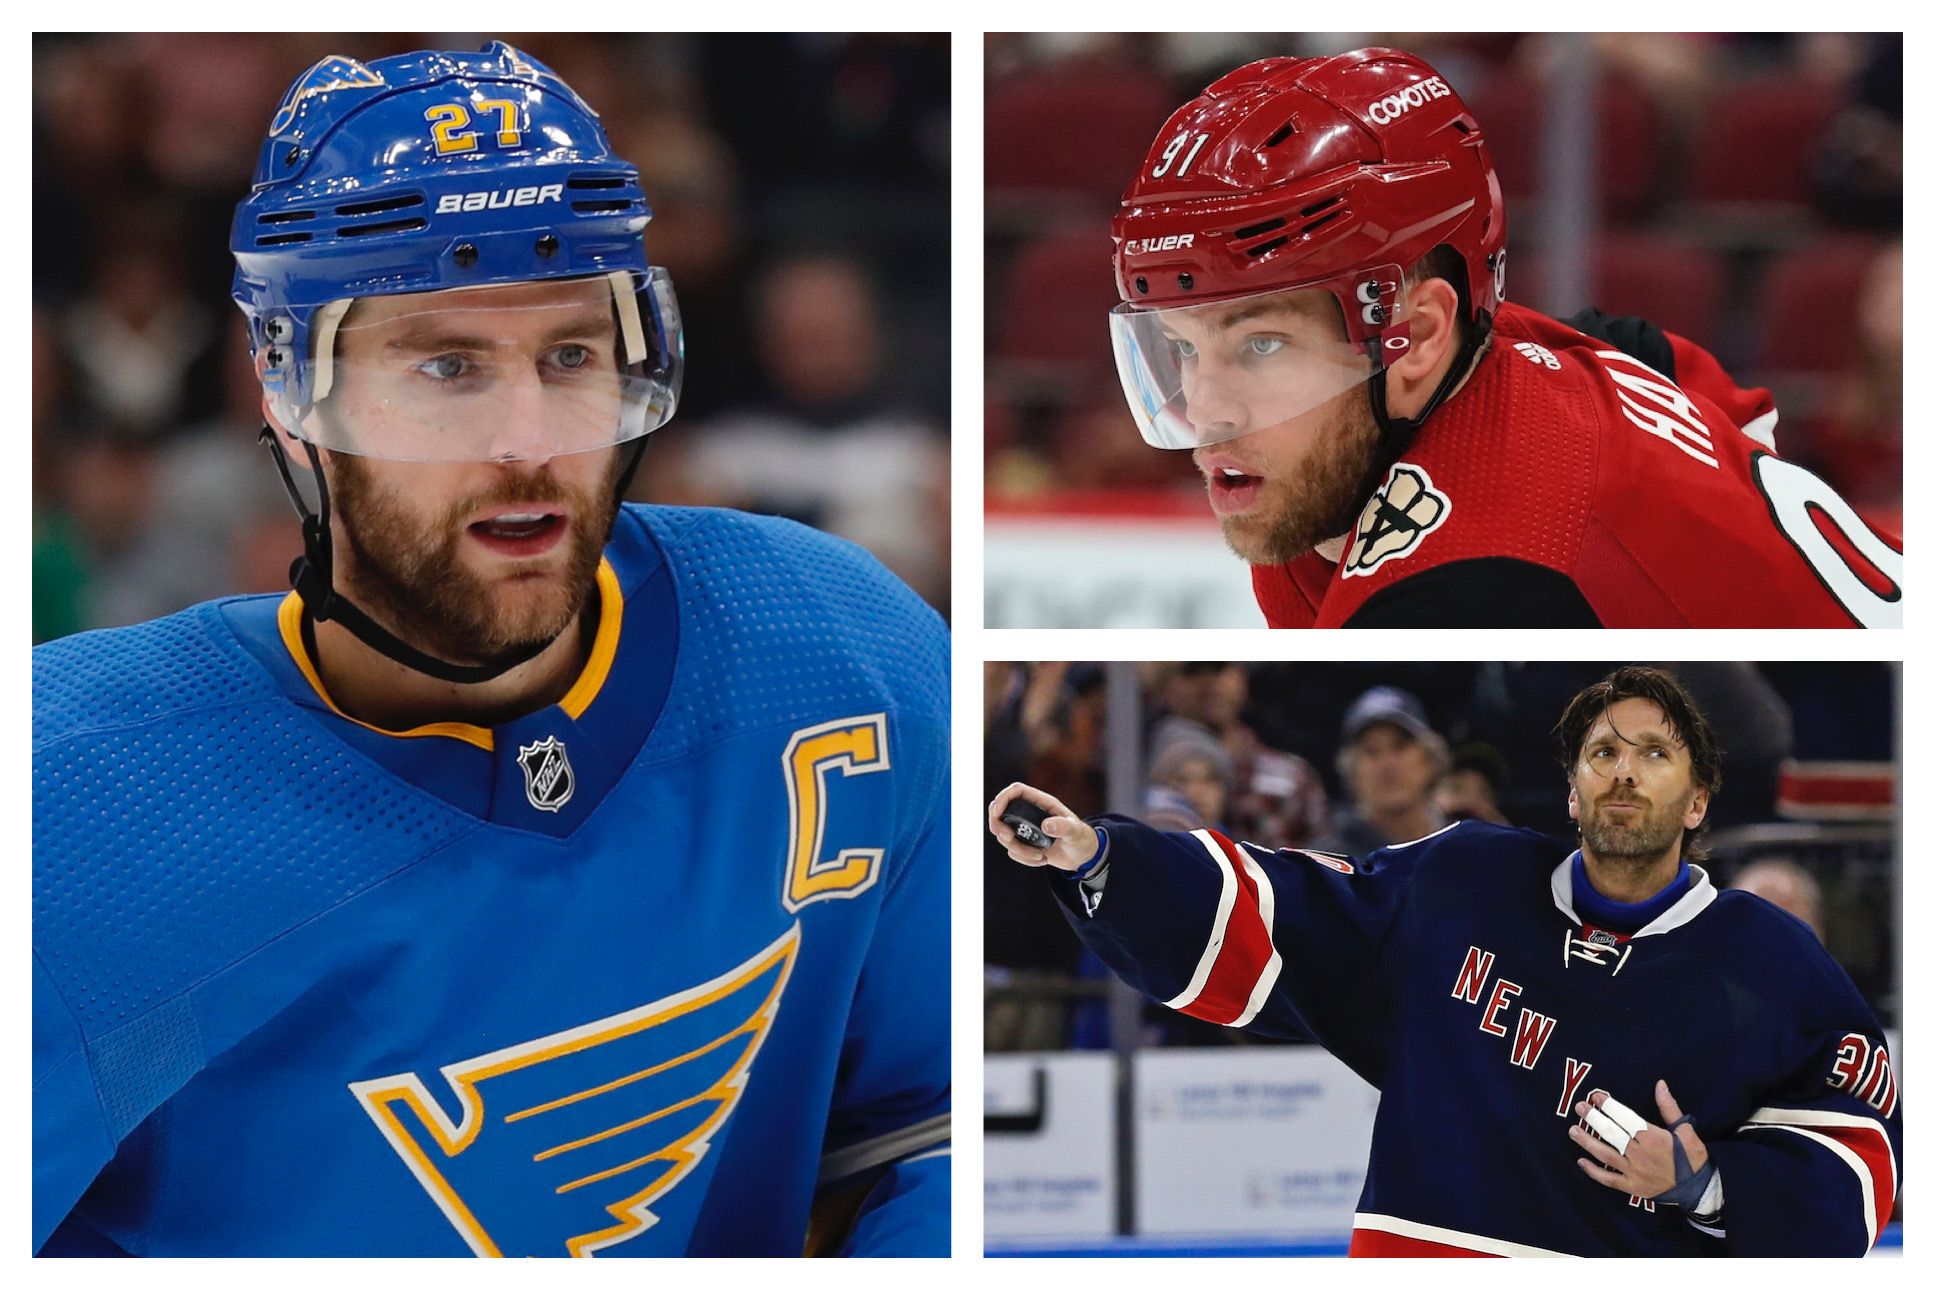 NHL free agency preview: Detroit Red Wings in market for goal